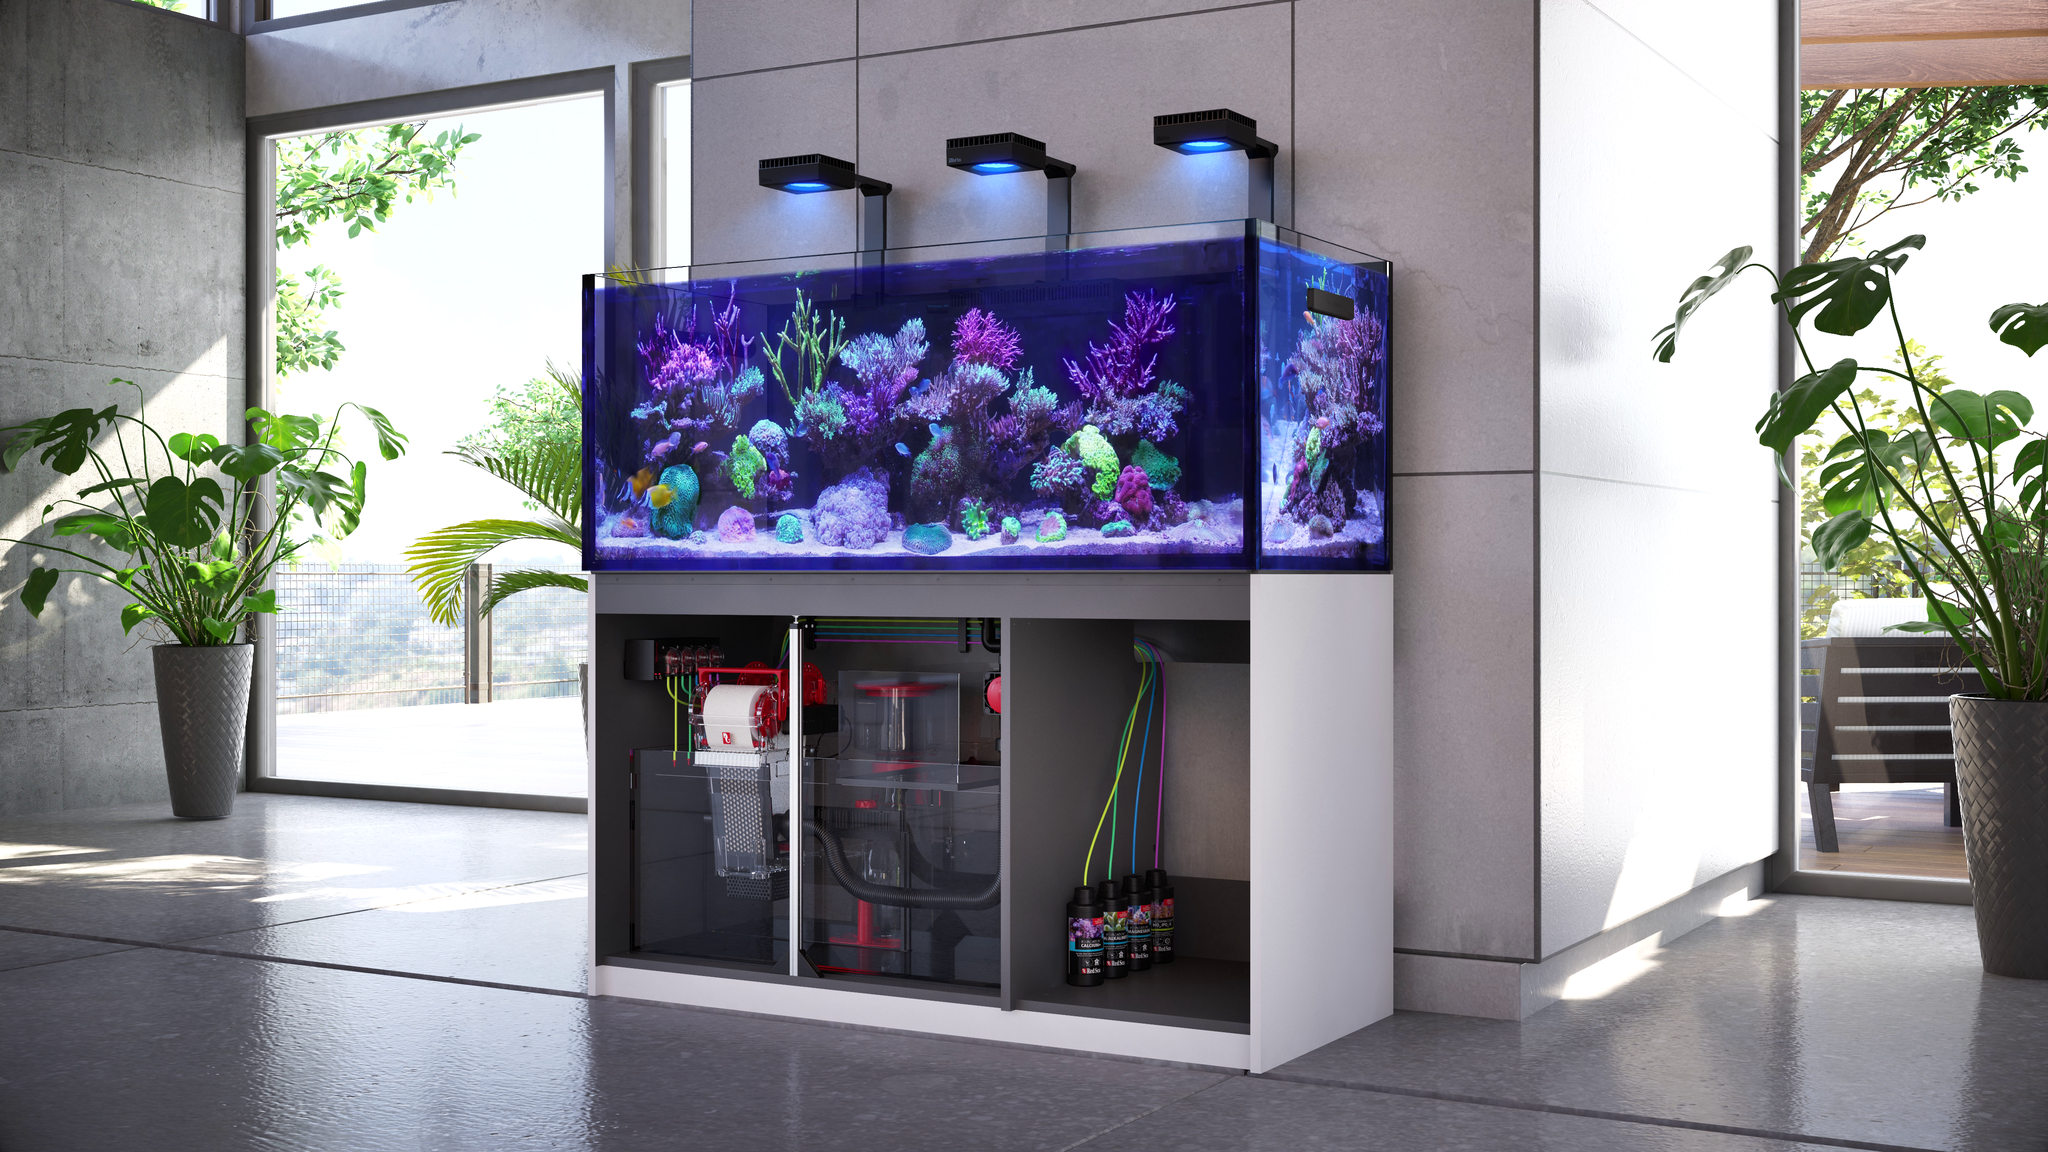 RED SEA REEFER 750 G2+ Deluxe Complete Aquarium System mit 4x RL 90 LED